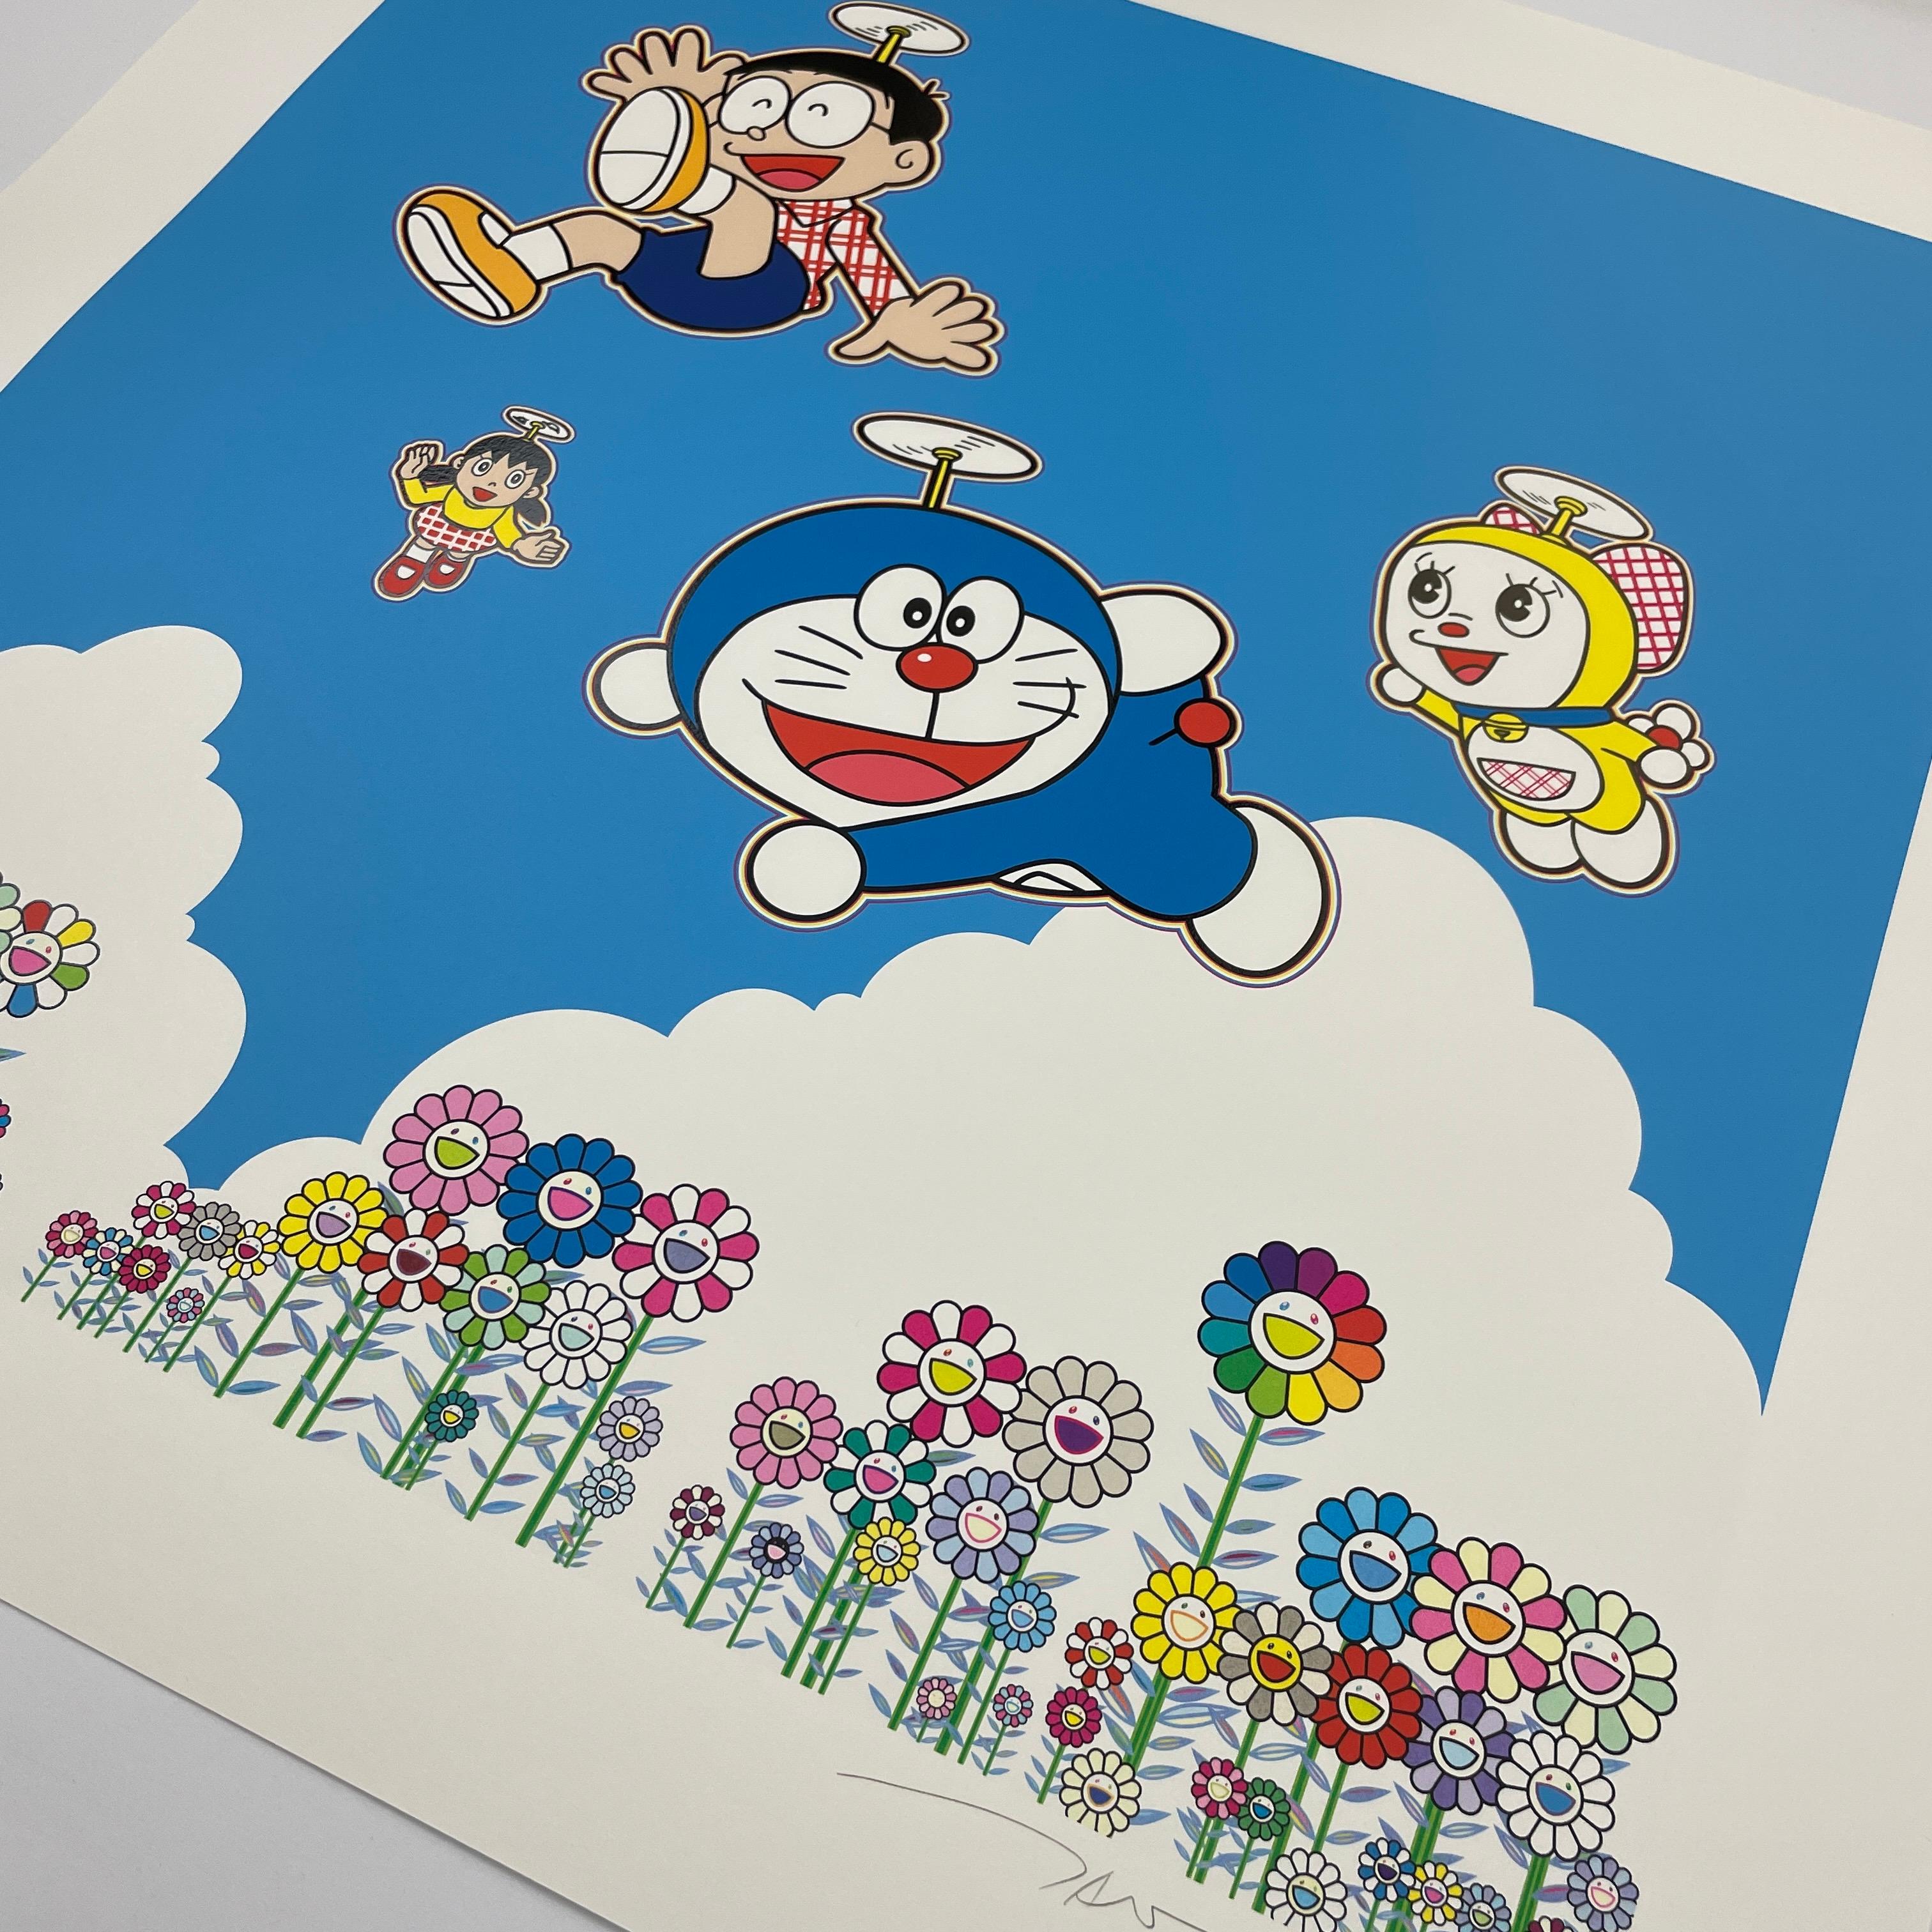 Artist: Takashi Murakami
Title: So Much Fun, Under the Blue Sky
Year: 2021
Edition: 100
Size: 500 x 500mm (image size) / 600 x 600mm (sheet size)
Medium: Silkscreen

This is hand signed by Takashi Murakami.

Note: This will be shipped from Japan so